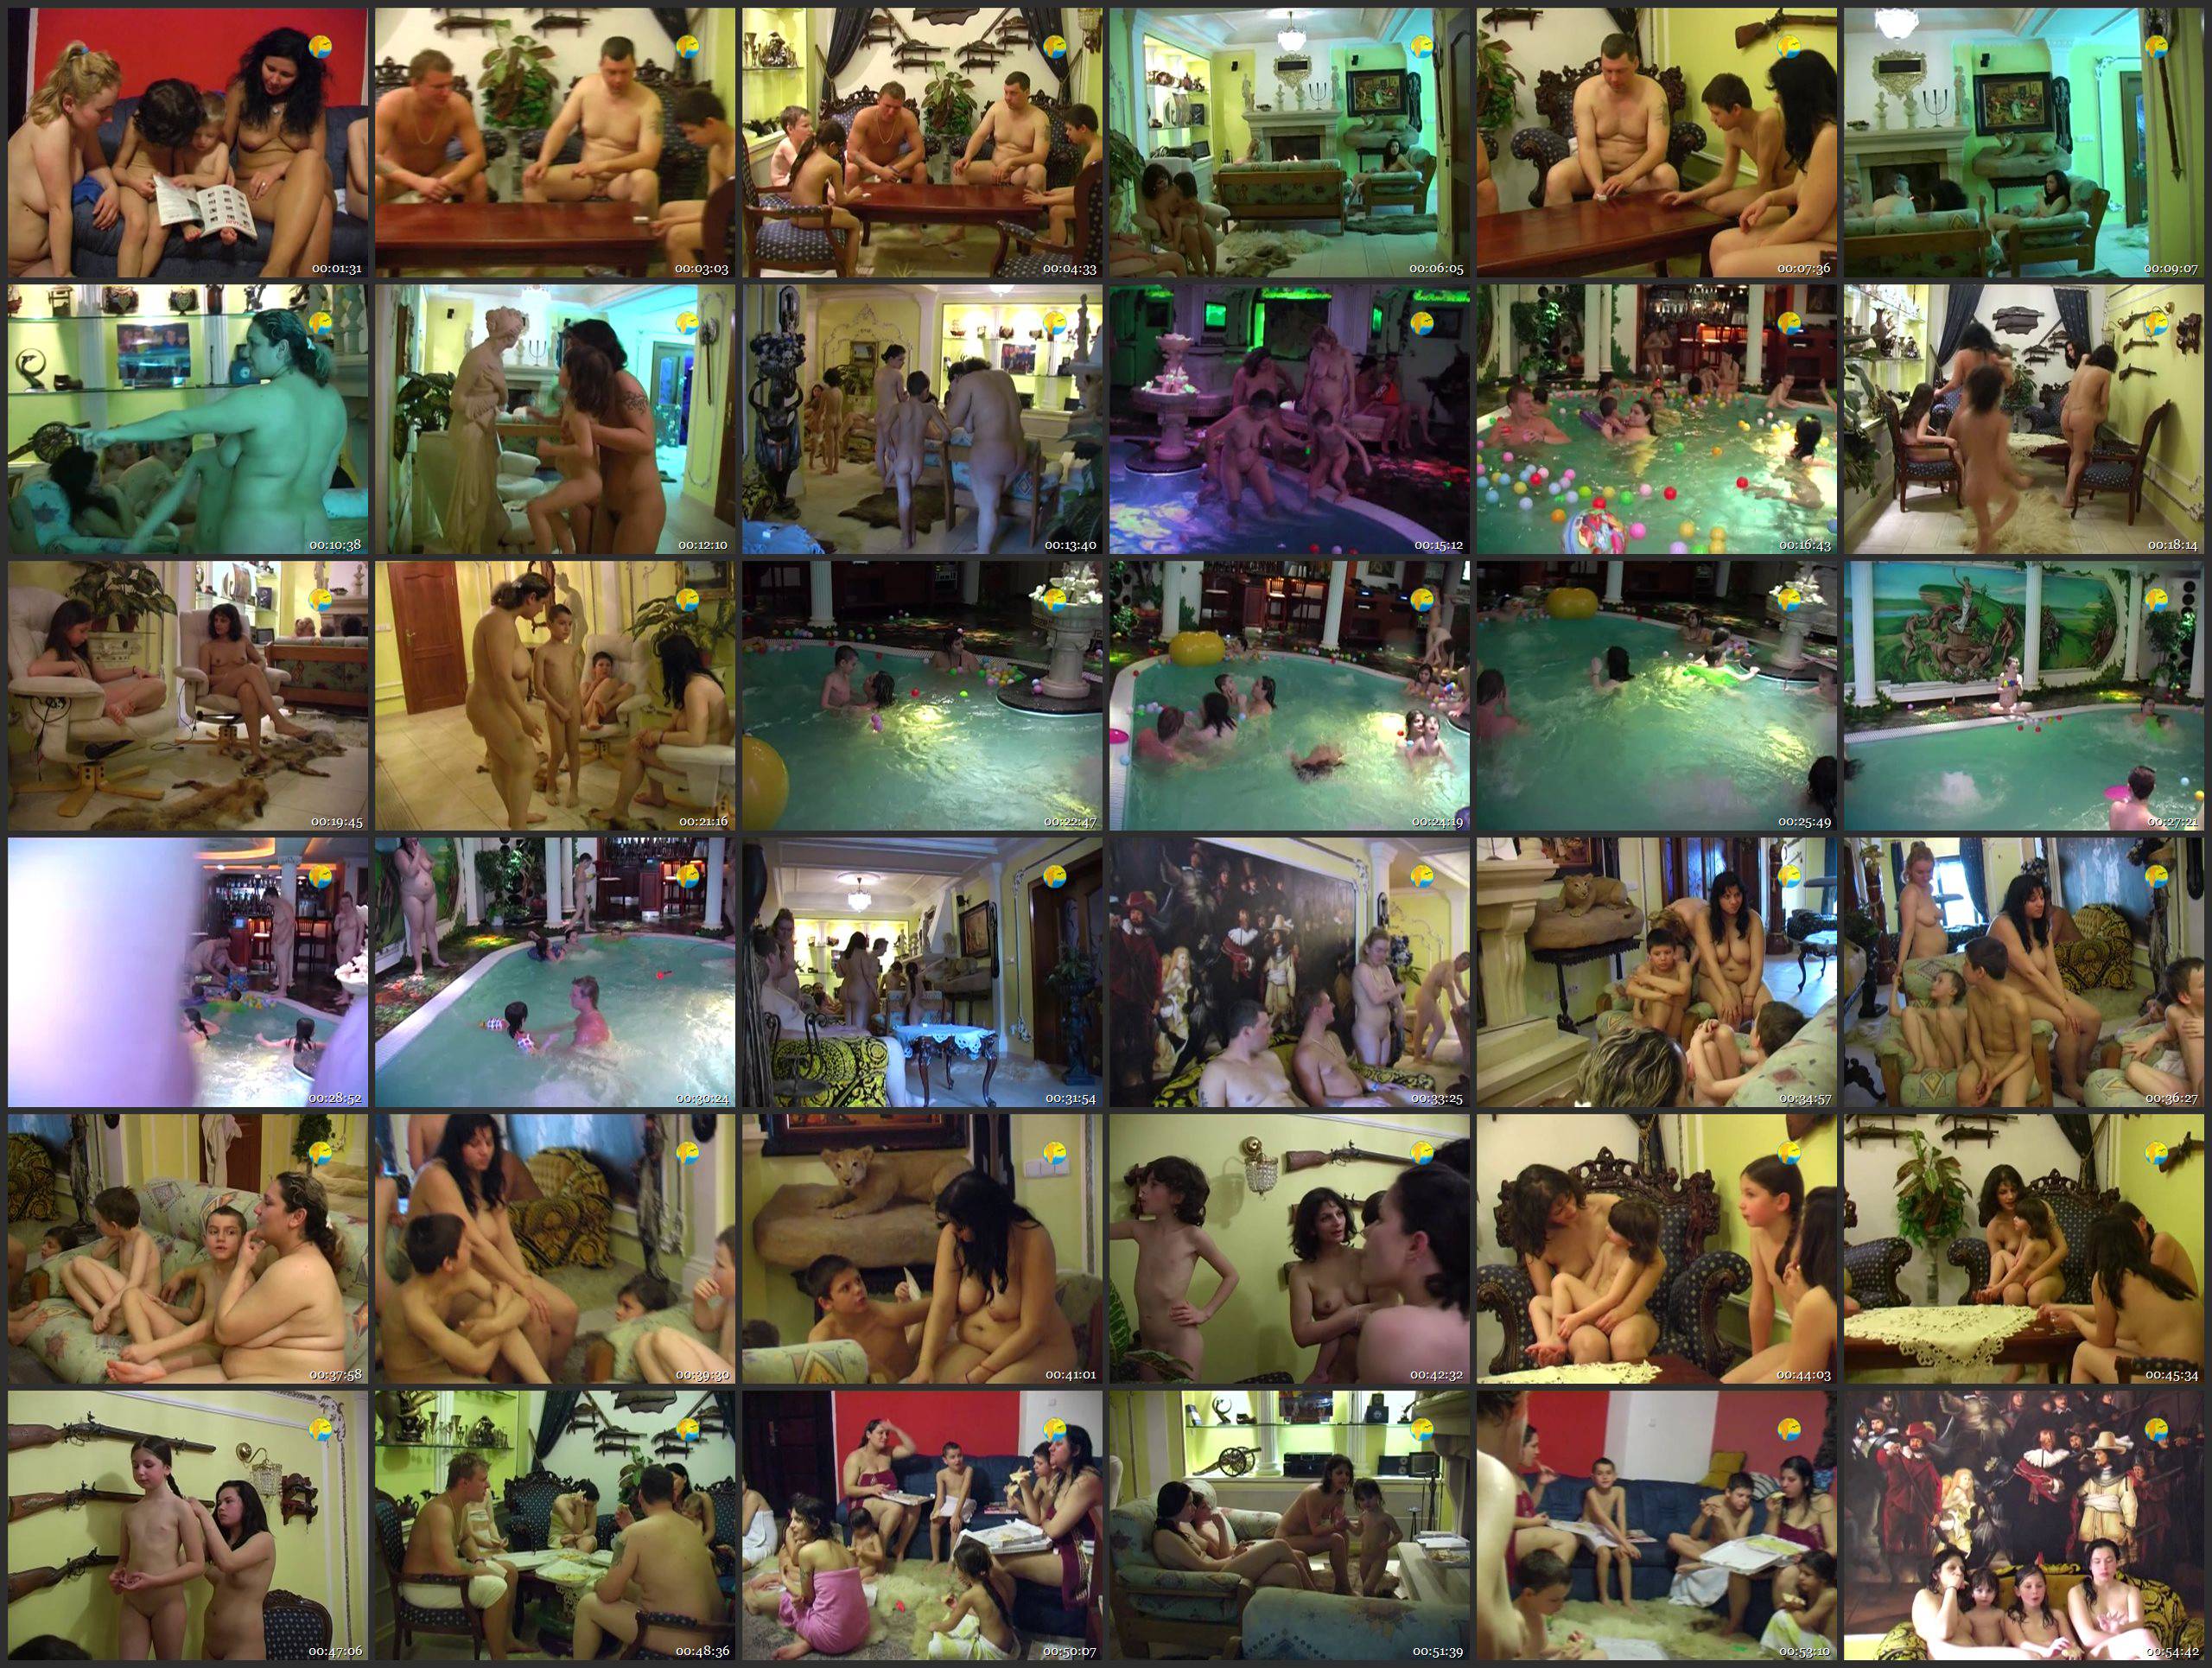 Naturist Freedom-One Day at the Castle Fantasia - Thumbnails